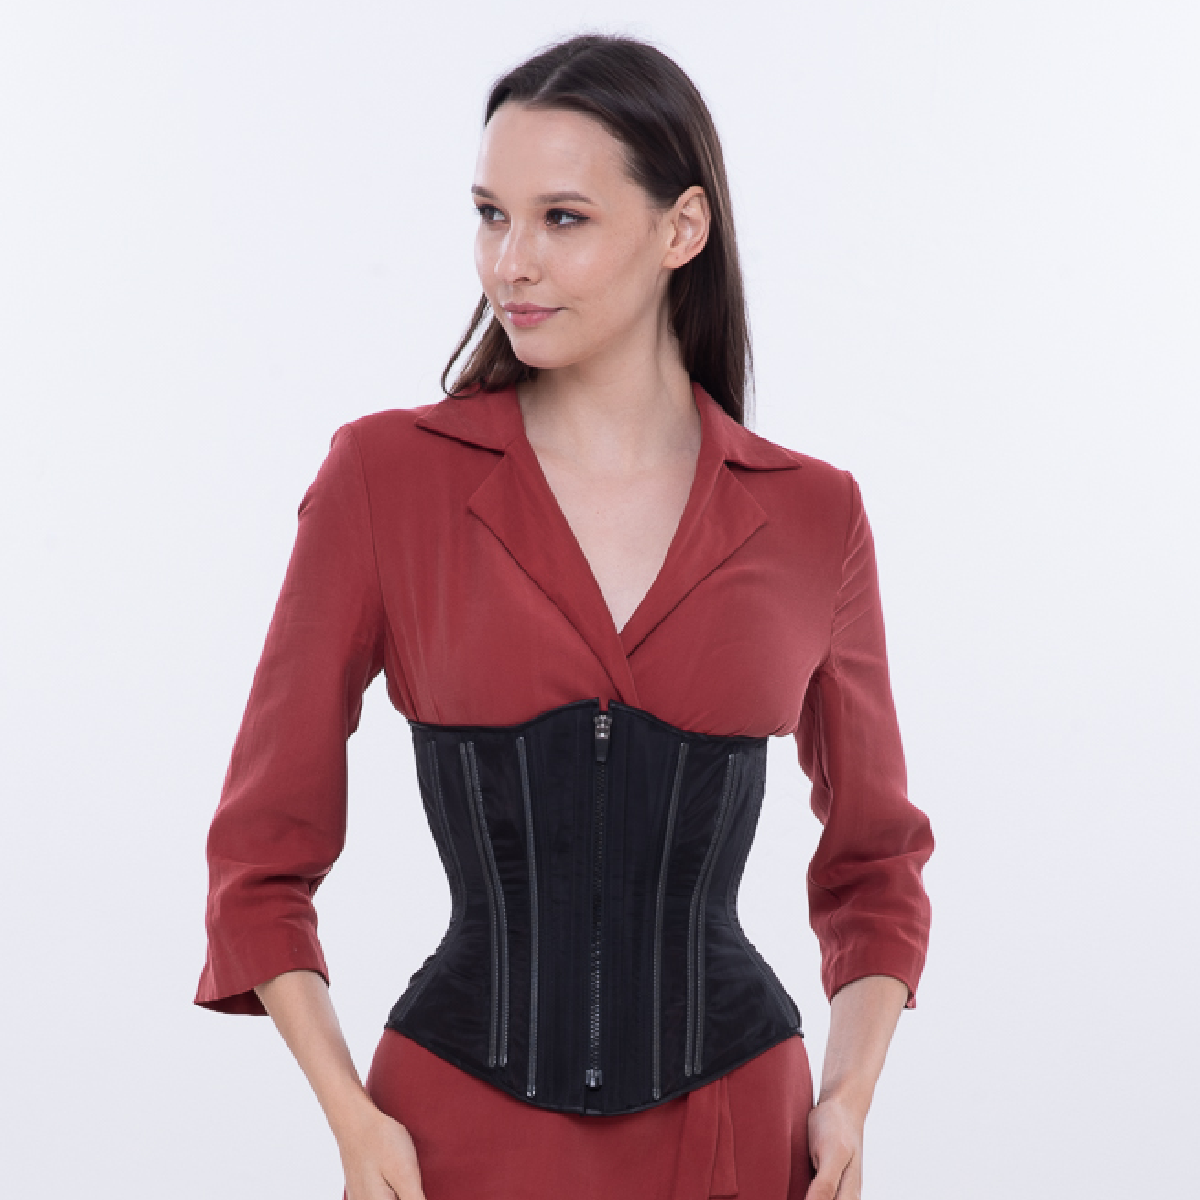 Contour Corsets Review (Summer Mesh Underbust) – Lucy's Corsetry